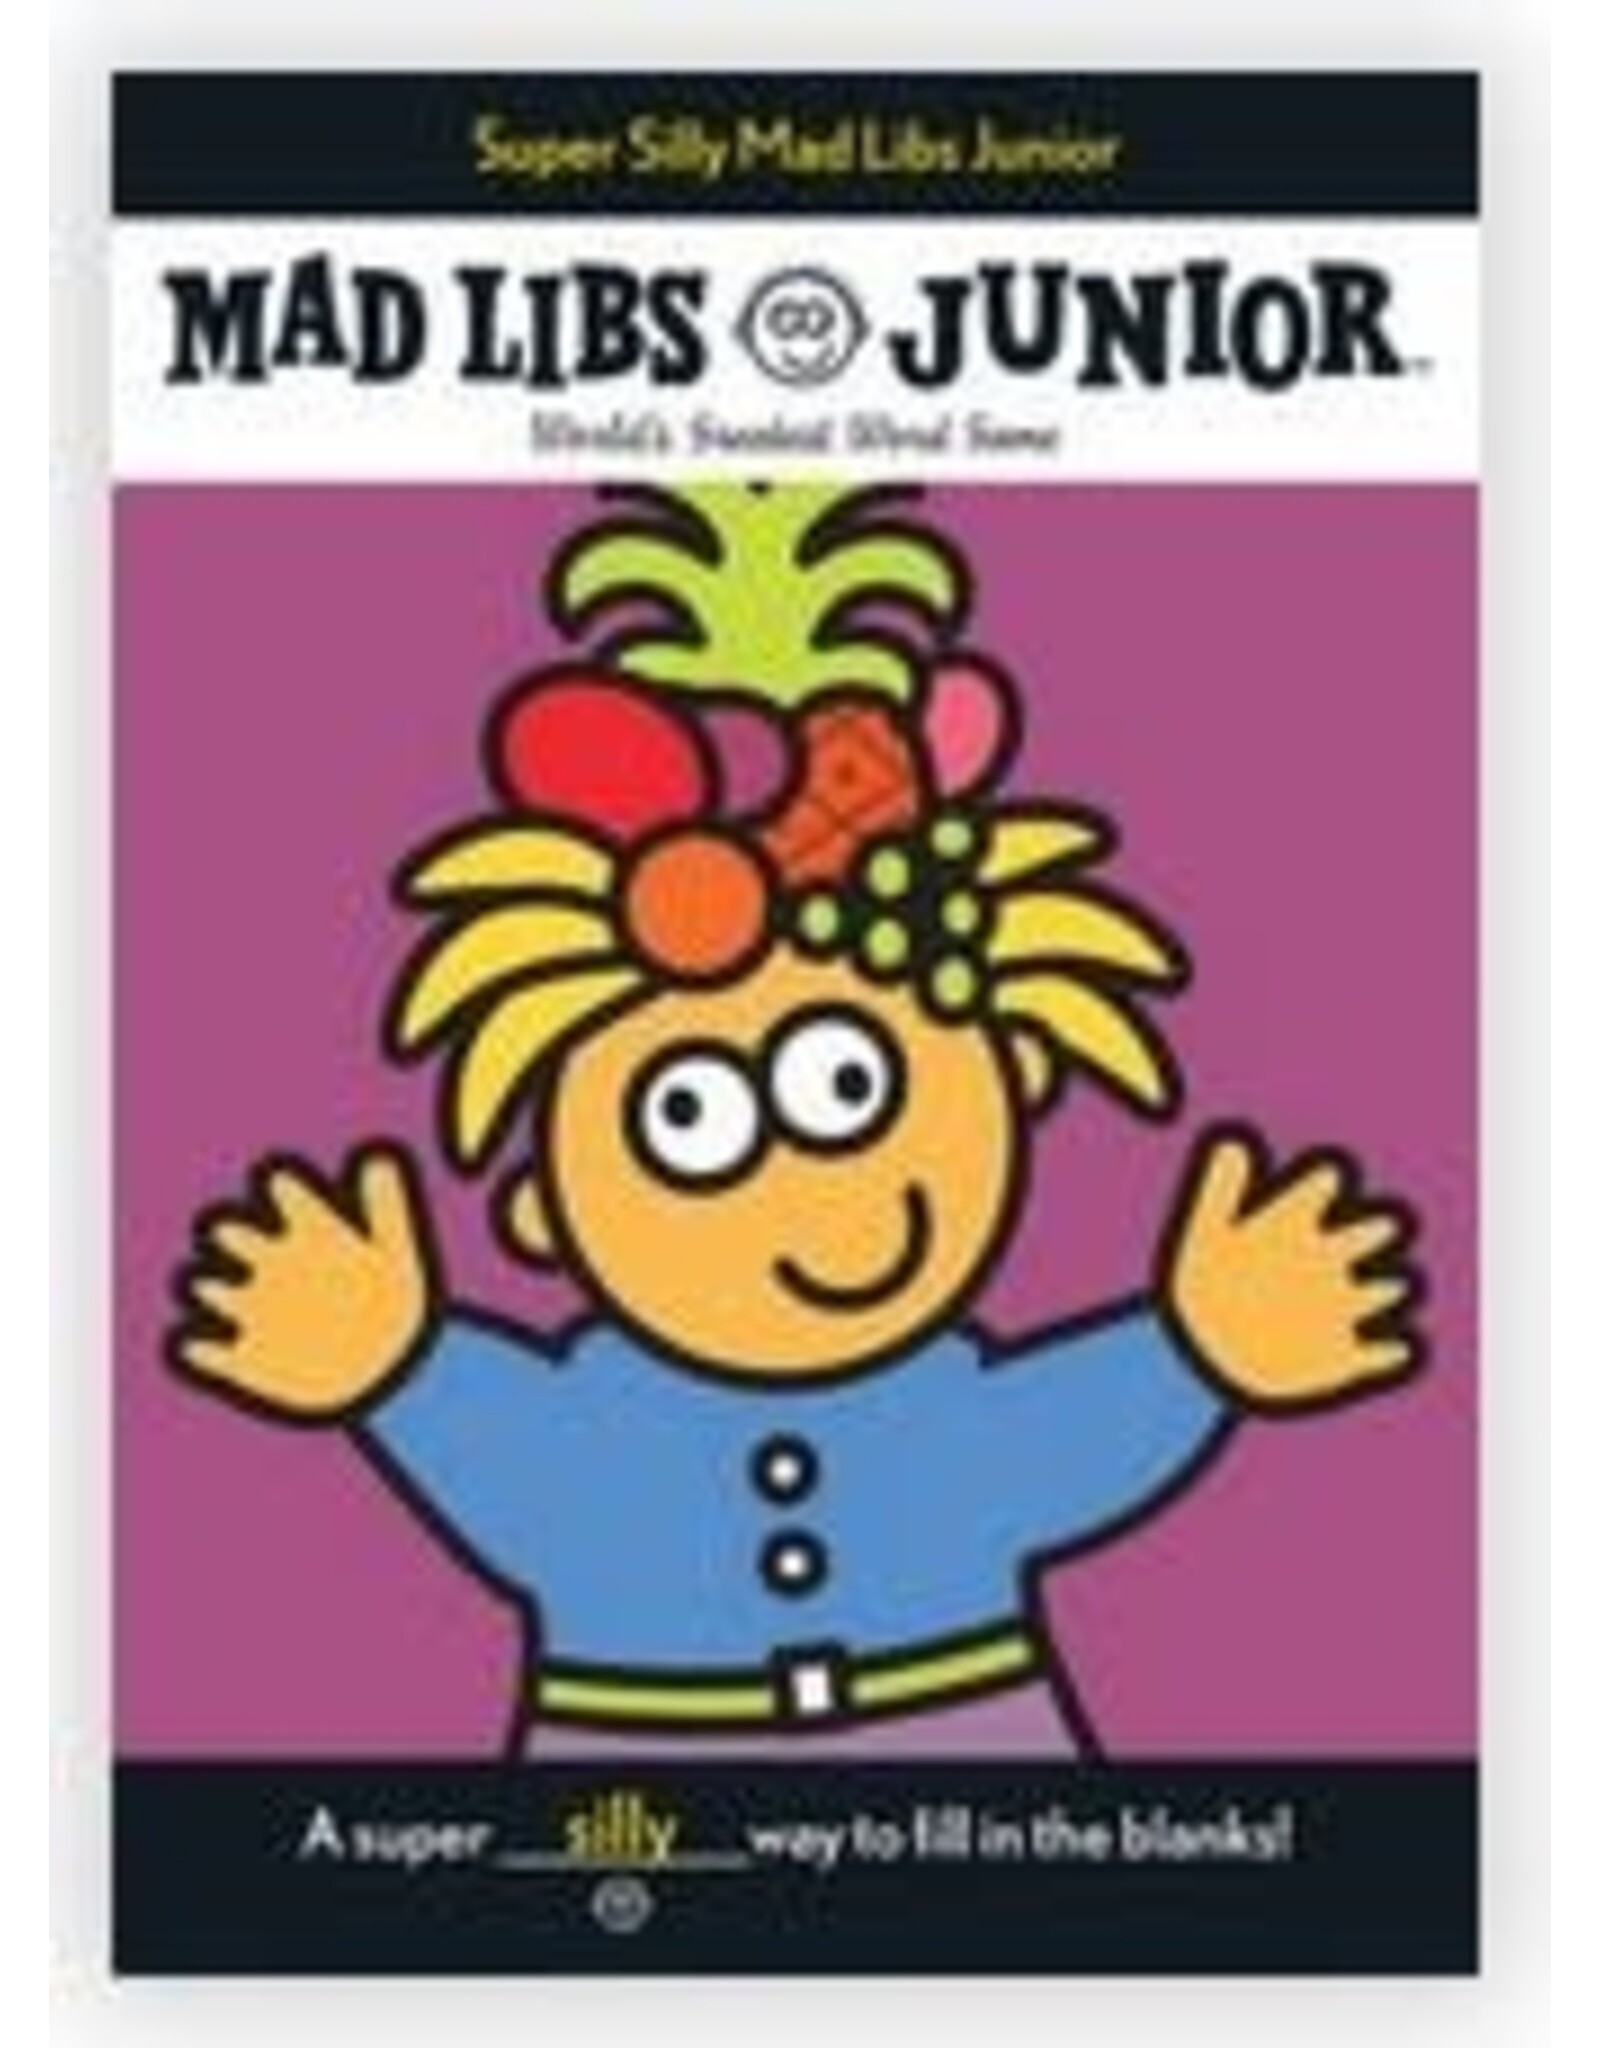 Mad Libs Super Silly Mad Libs Junior